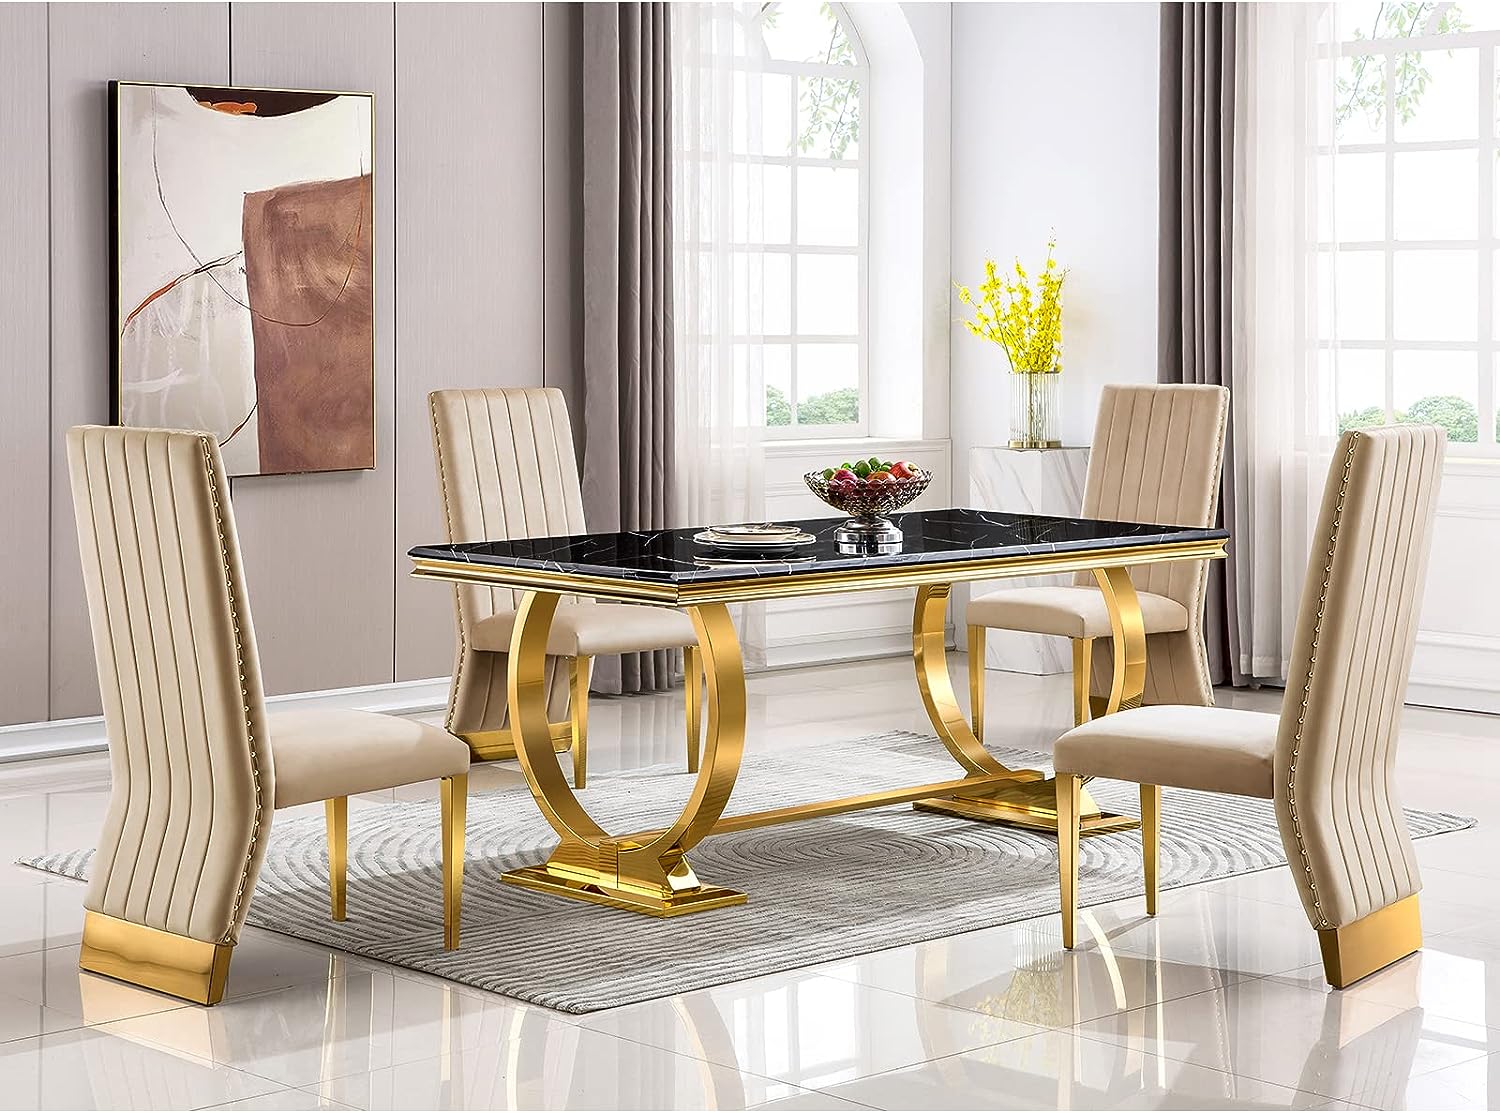 Elegant and Luxurious: The Features of the Beige Velvet Dining Chair